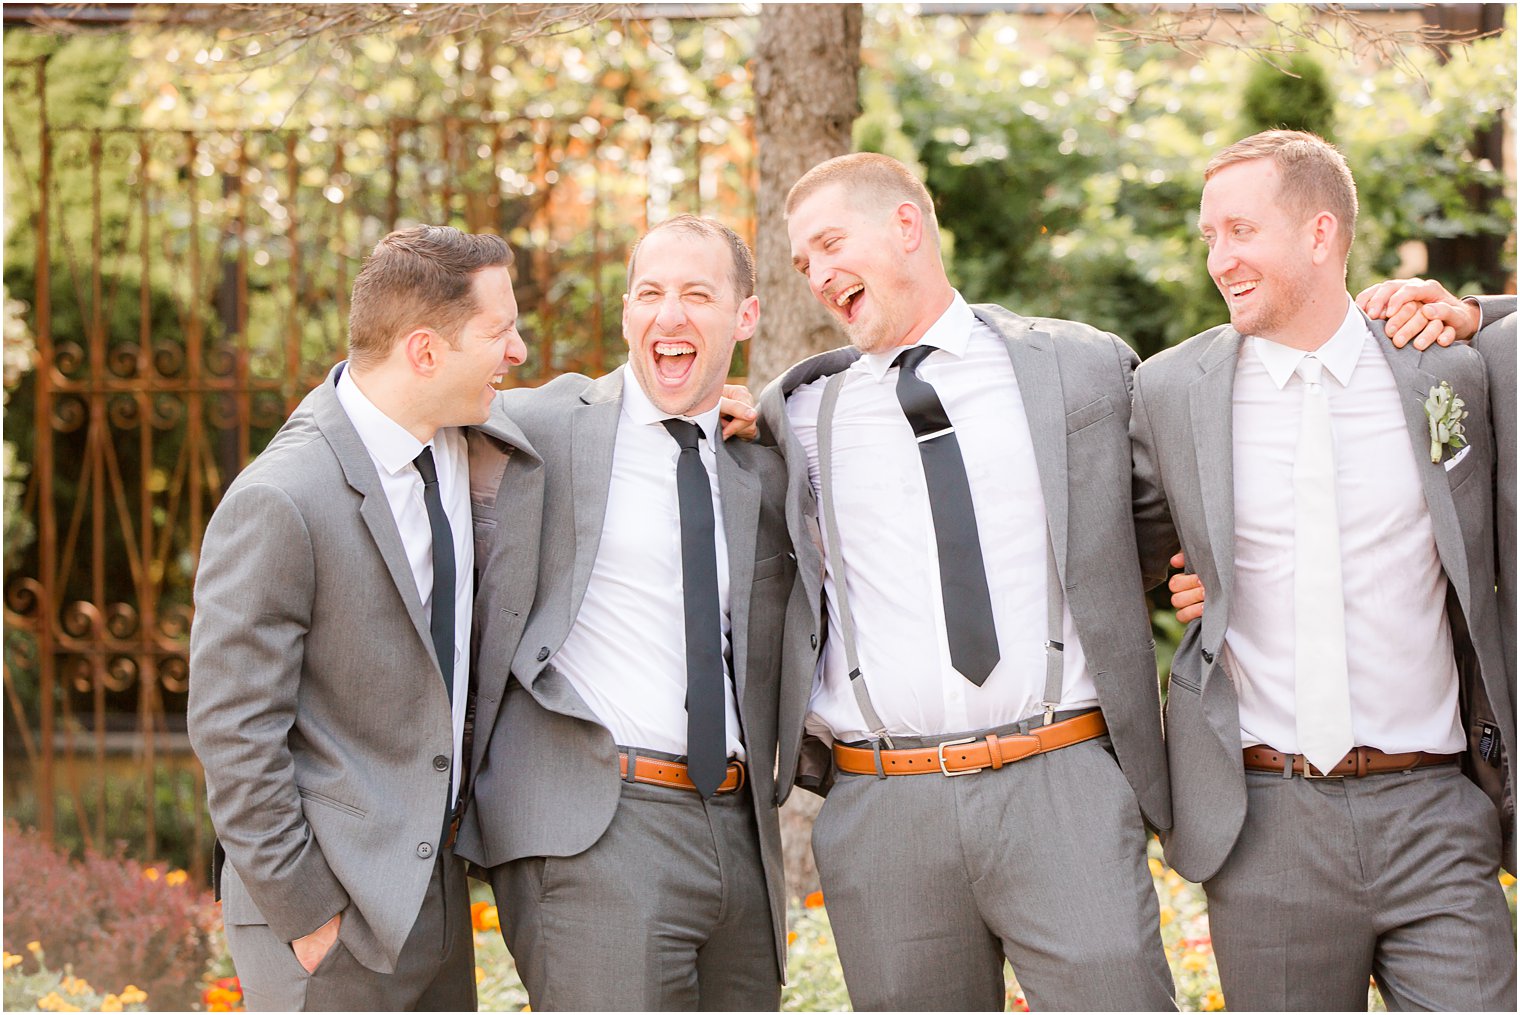 Candid photo of groomsmen laughing